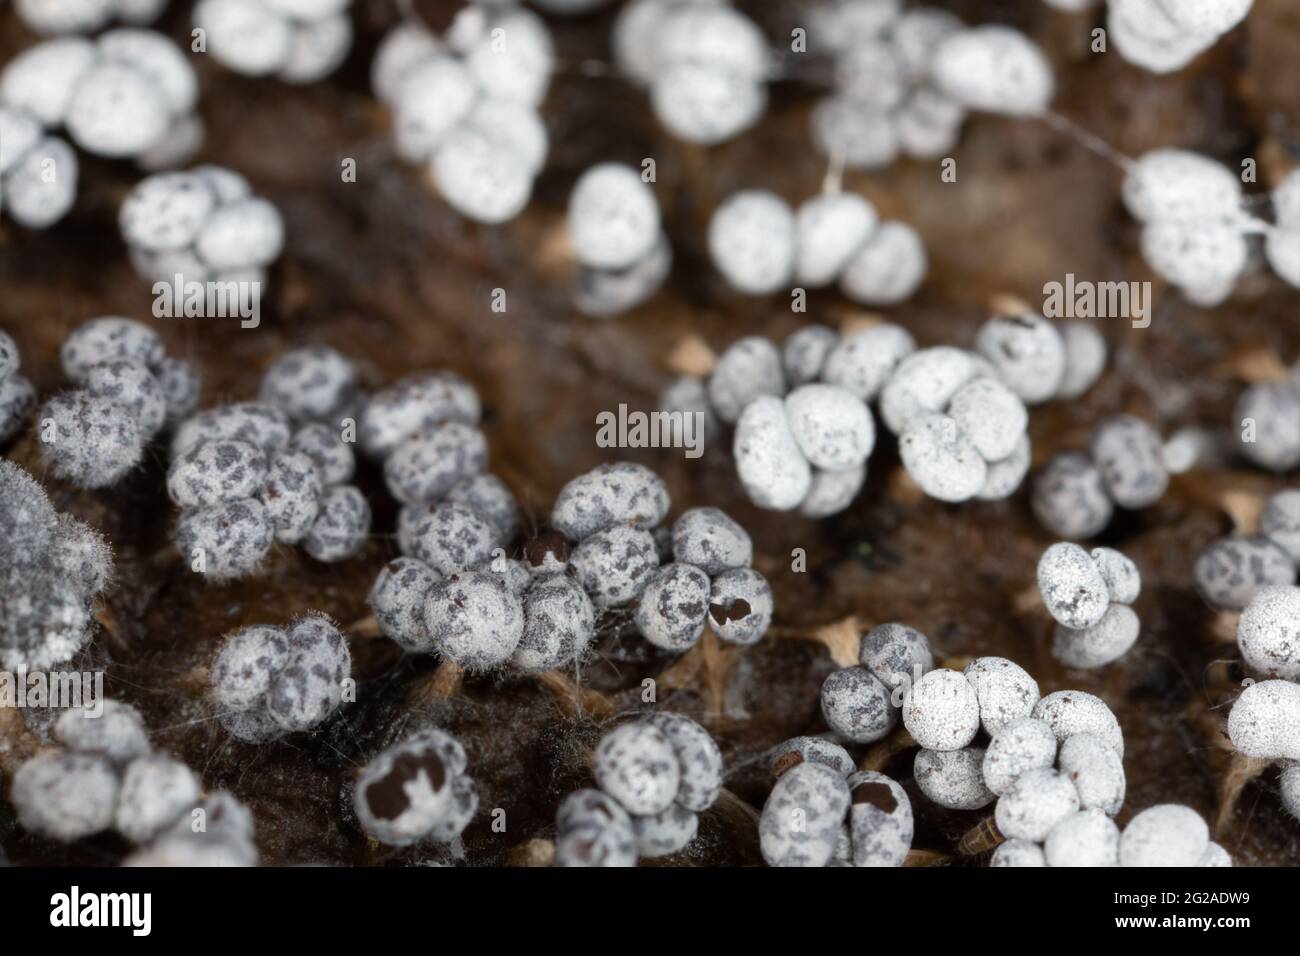 Slime mould, Physarum confertum growing on aspen, Populus tremula wood photographed with high magnification Stock Photo